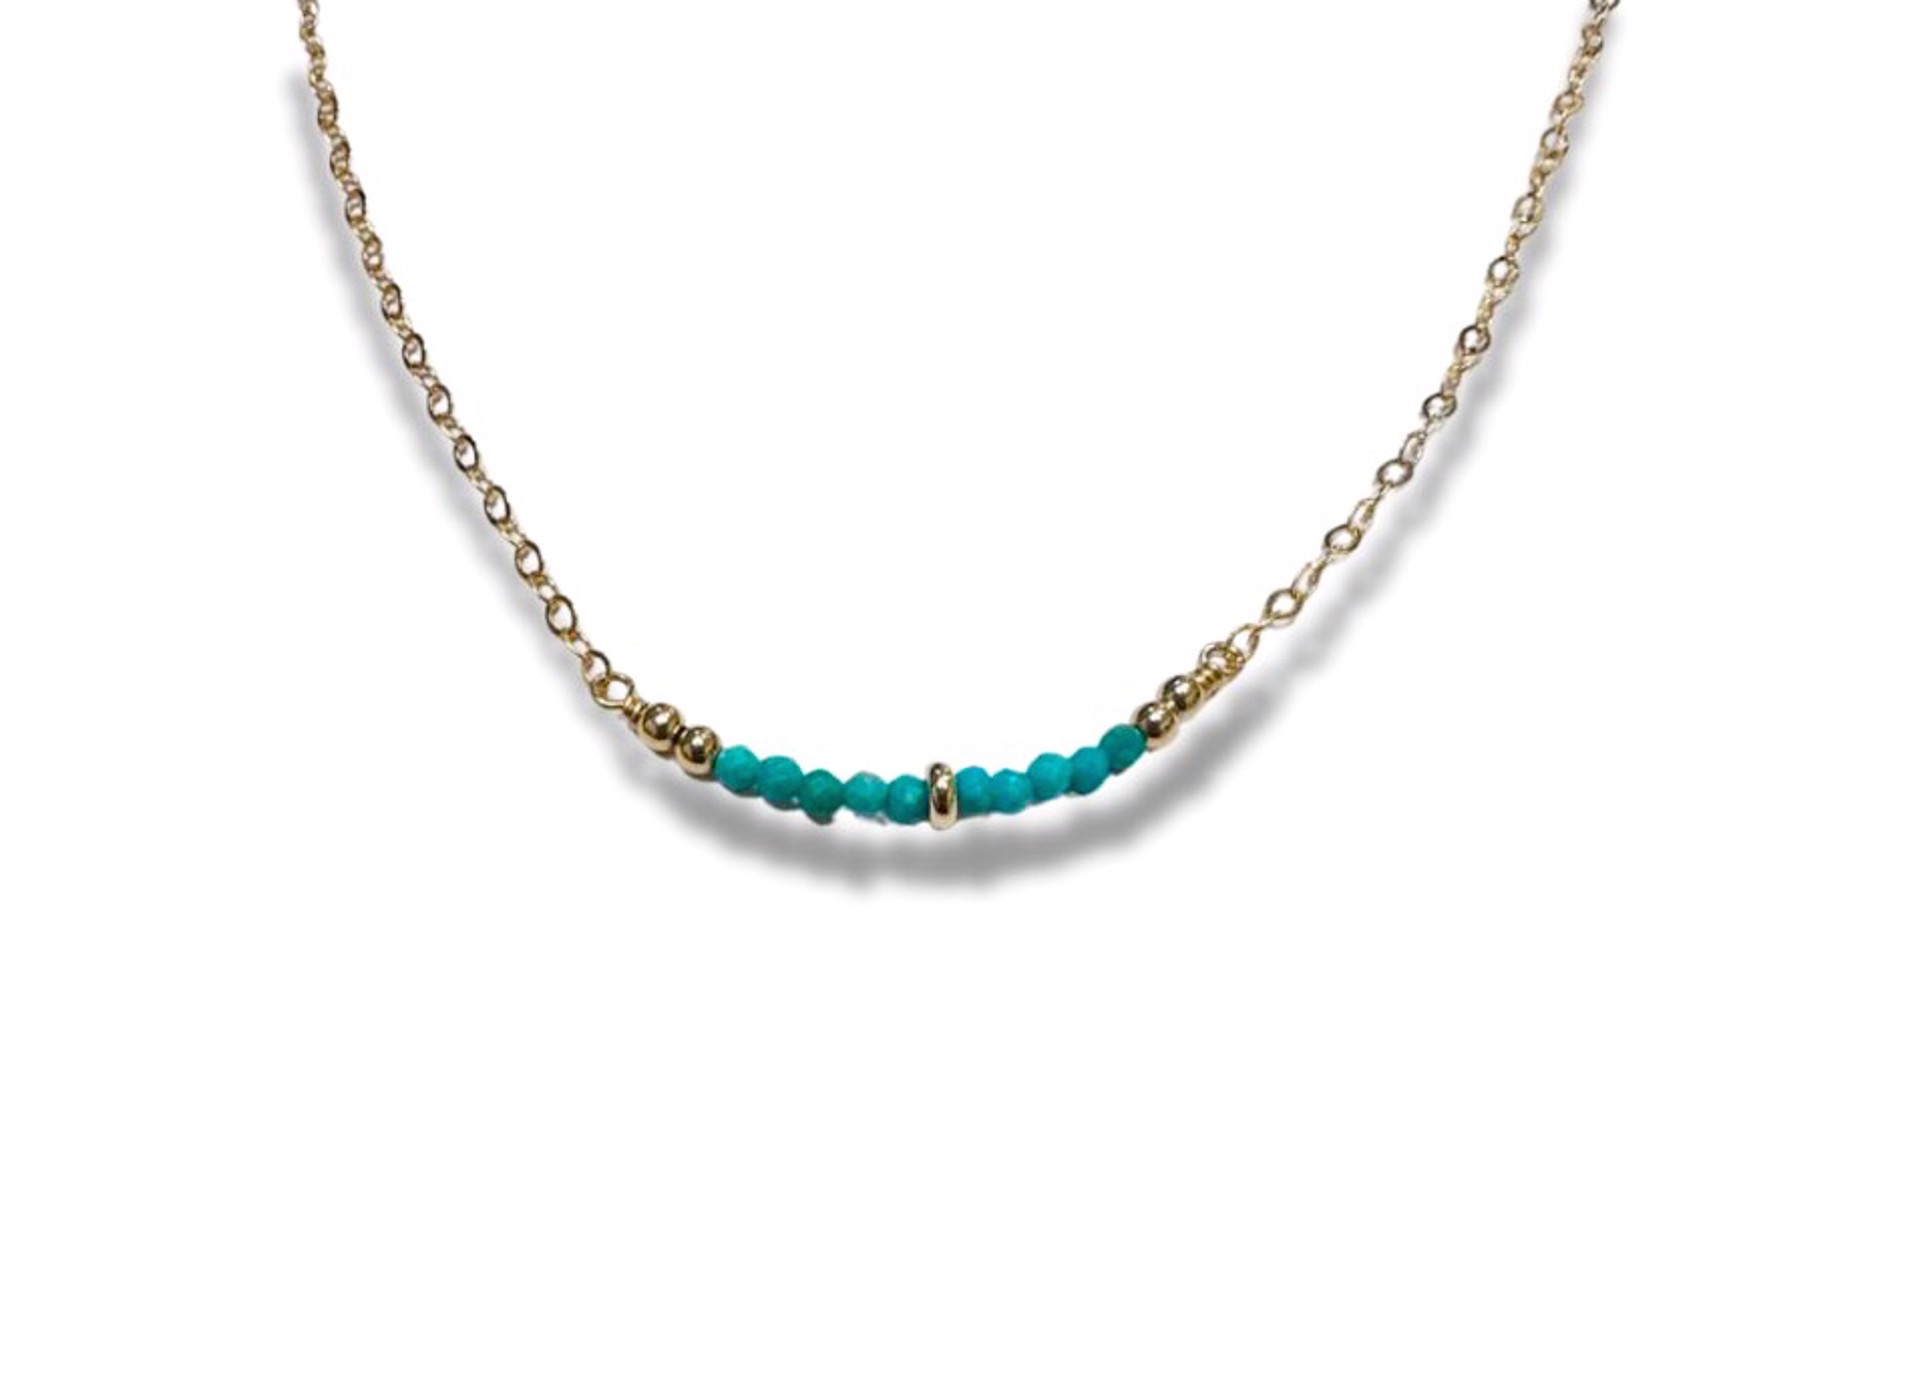 Necklace - 14K Gold Filled Sleeping Beauty Turquoise Crescent by Julia Balestracci